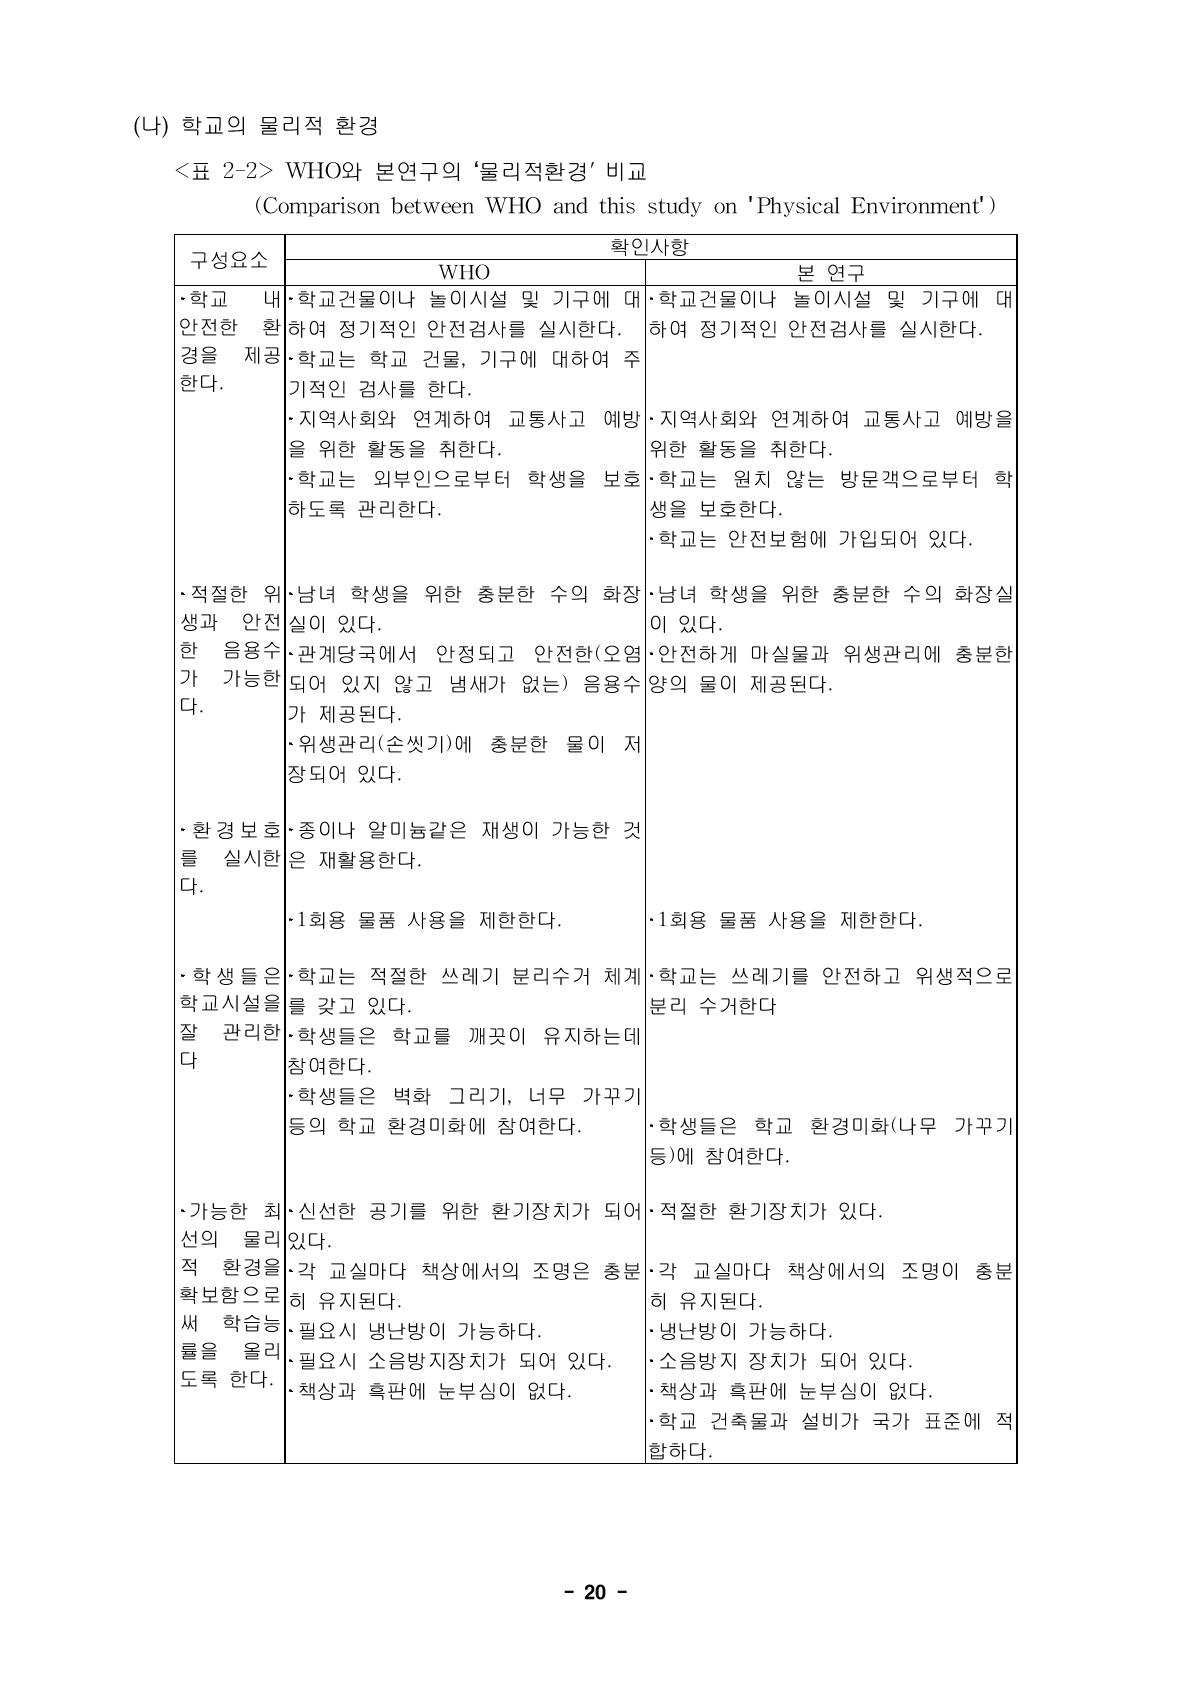 WHO와 본연구의 ‘물리적환경’ 비교 (Comparison between WHO and this study on 'Physical Environment')